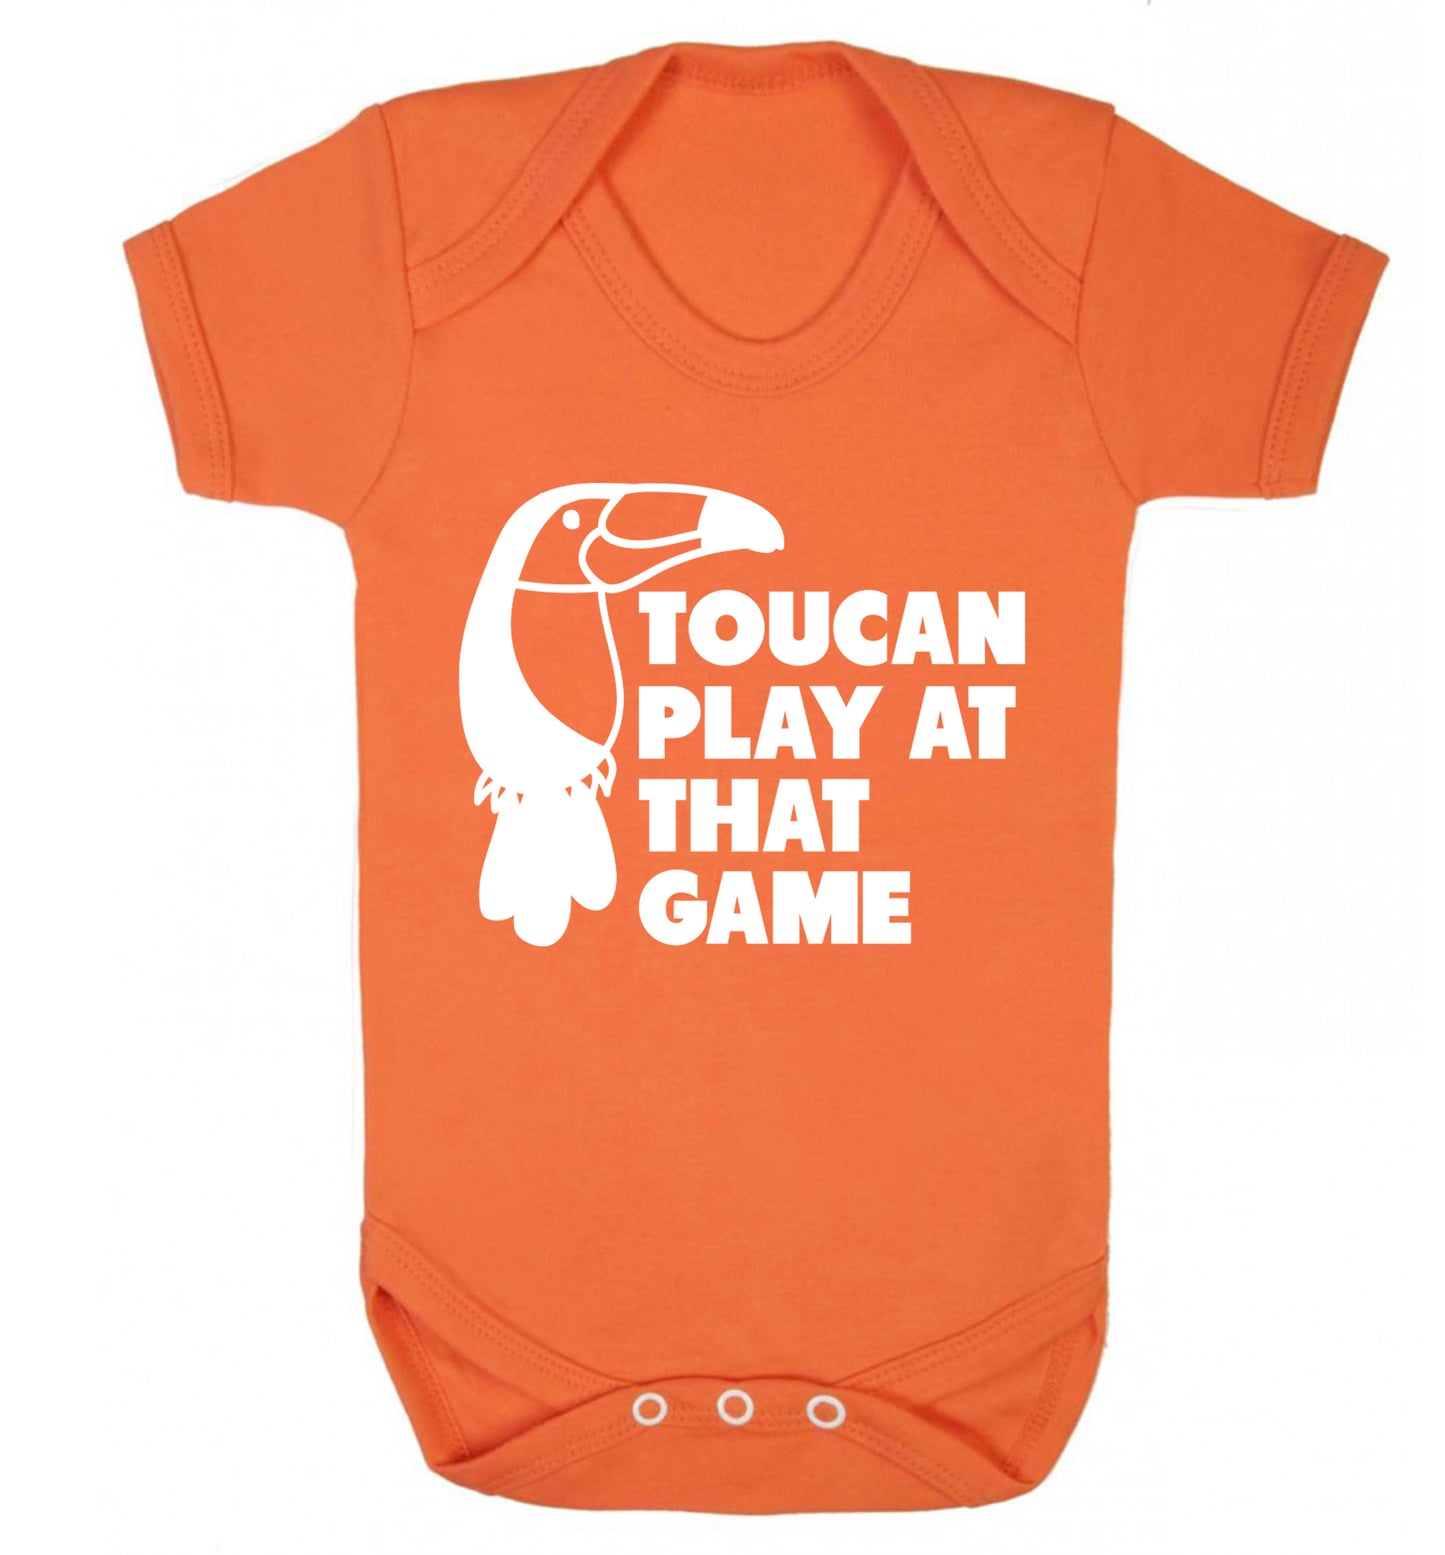 Toucan play at that game Baby Vest orange 18-24 months